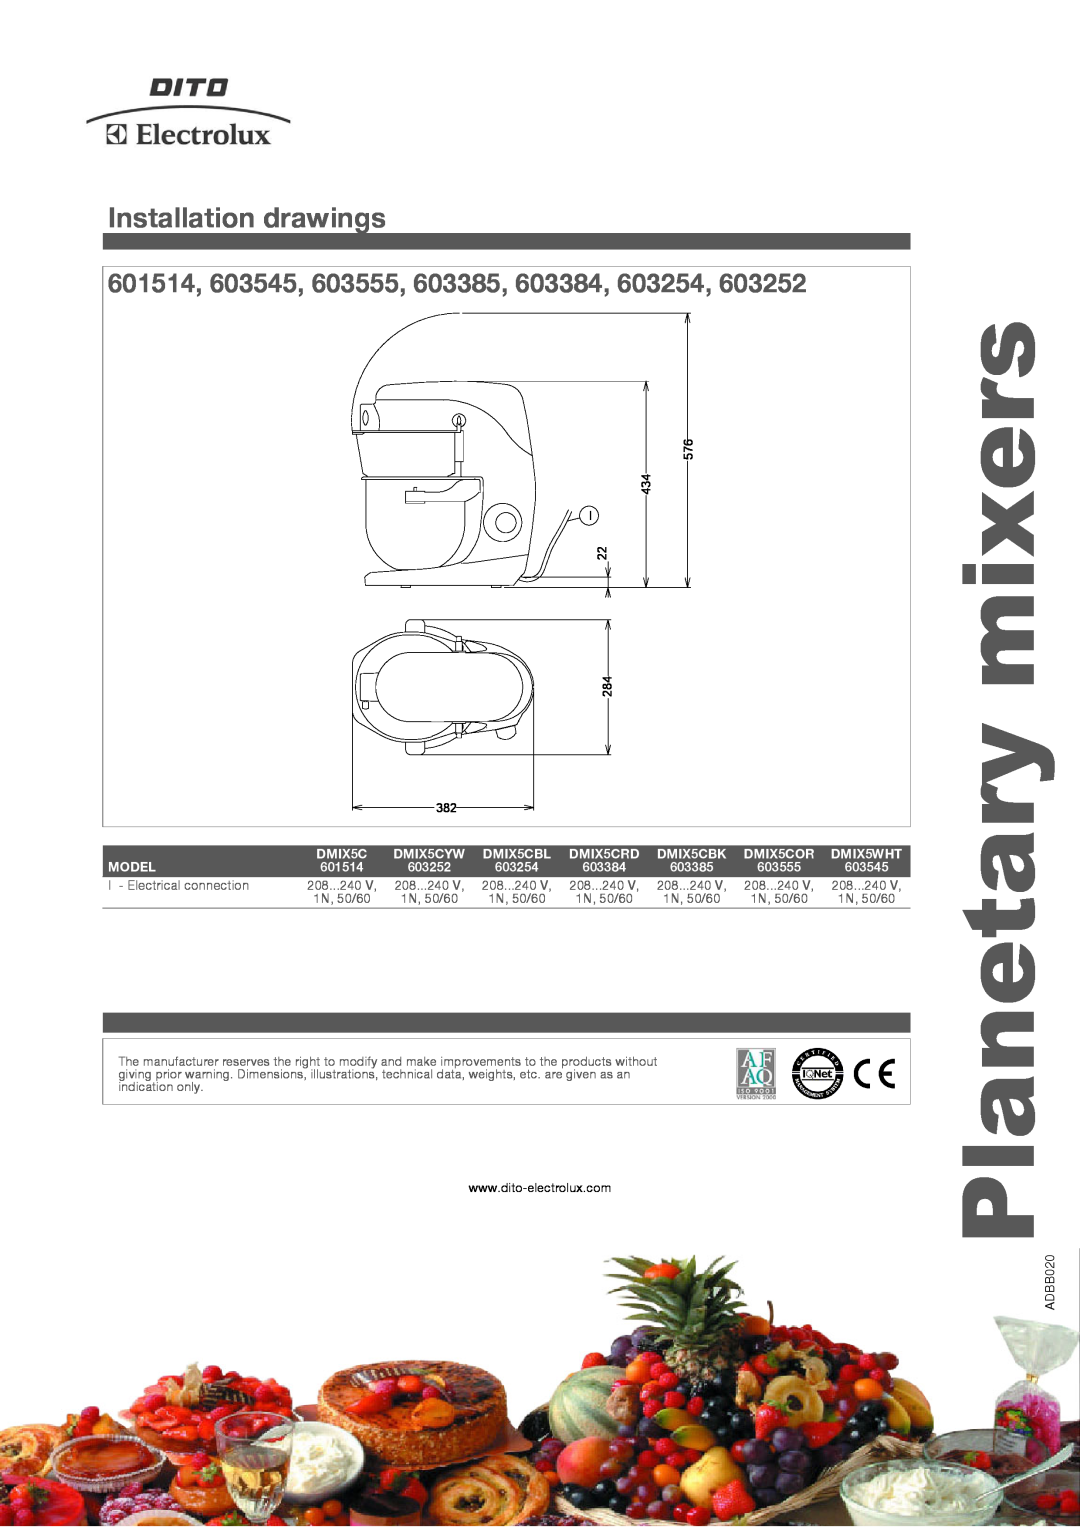 Electrolux DMIX5COR manual Installation drawings, 601514, 603545, 603555, 603385, 603384, 603254, Planetary mixers, 603252 